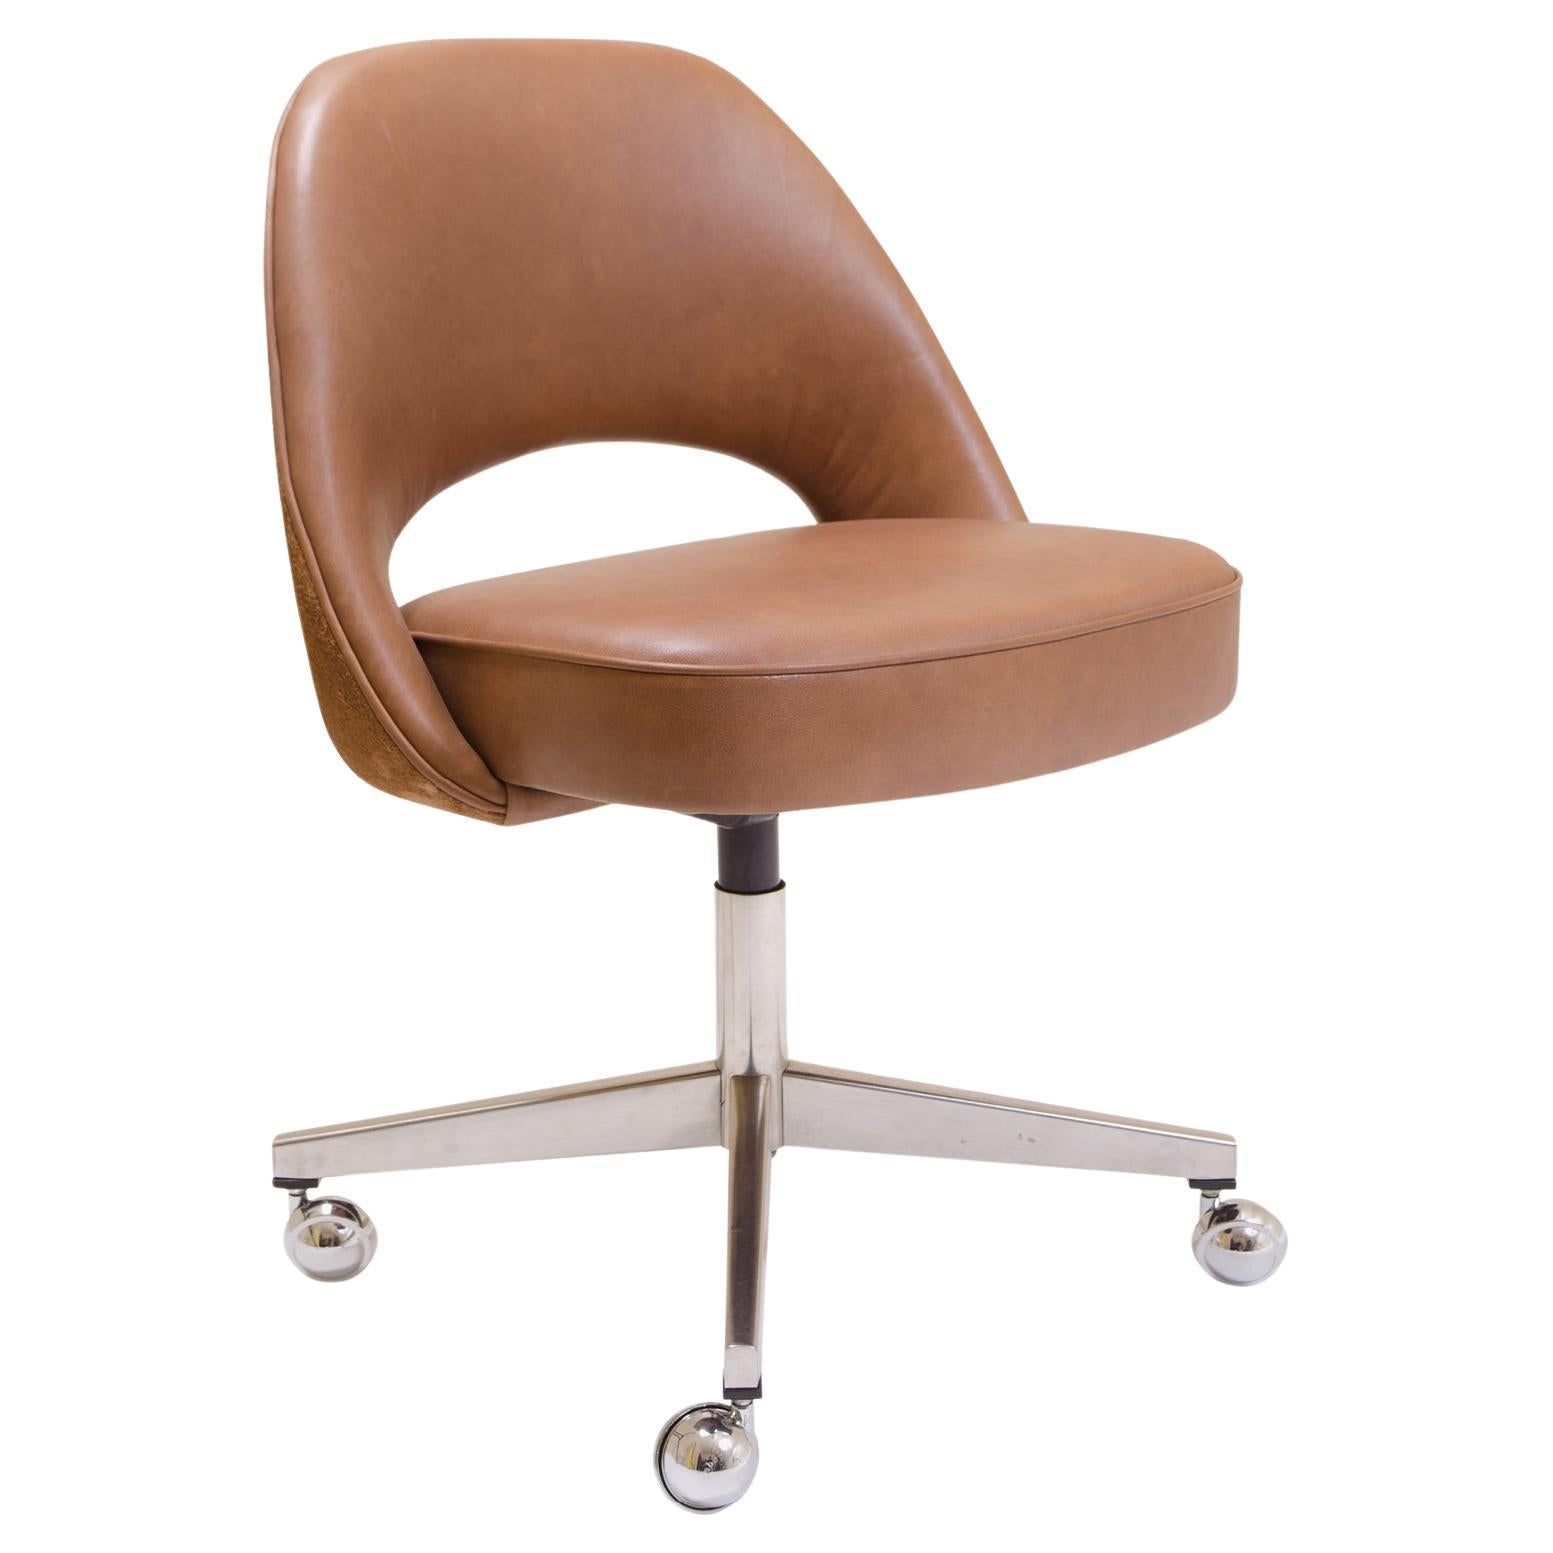 Saarinen Executive Armless Chair in Leather and Suede, Vintage Swivel Base